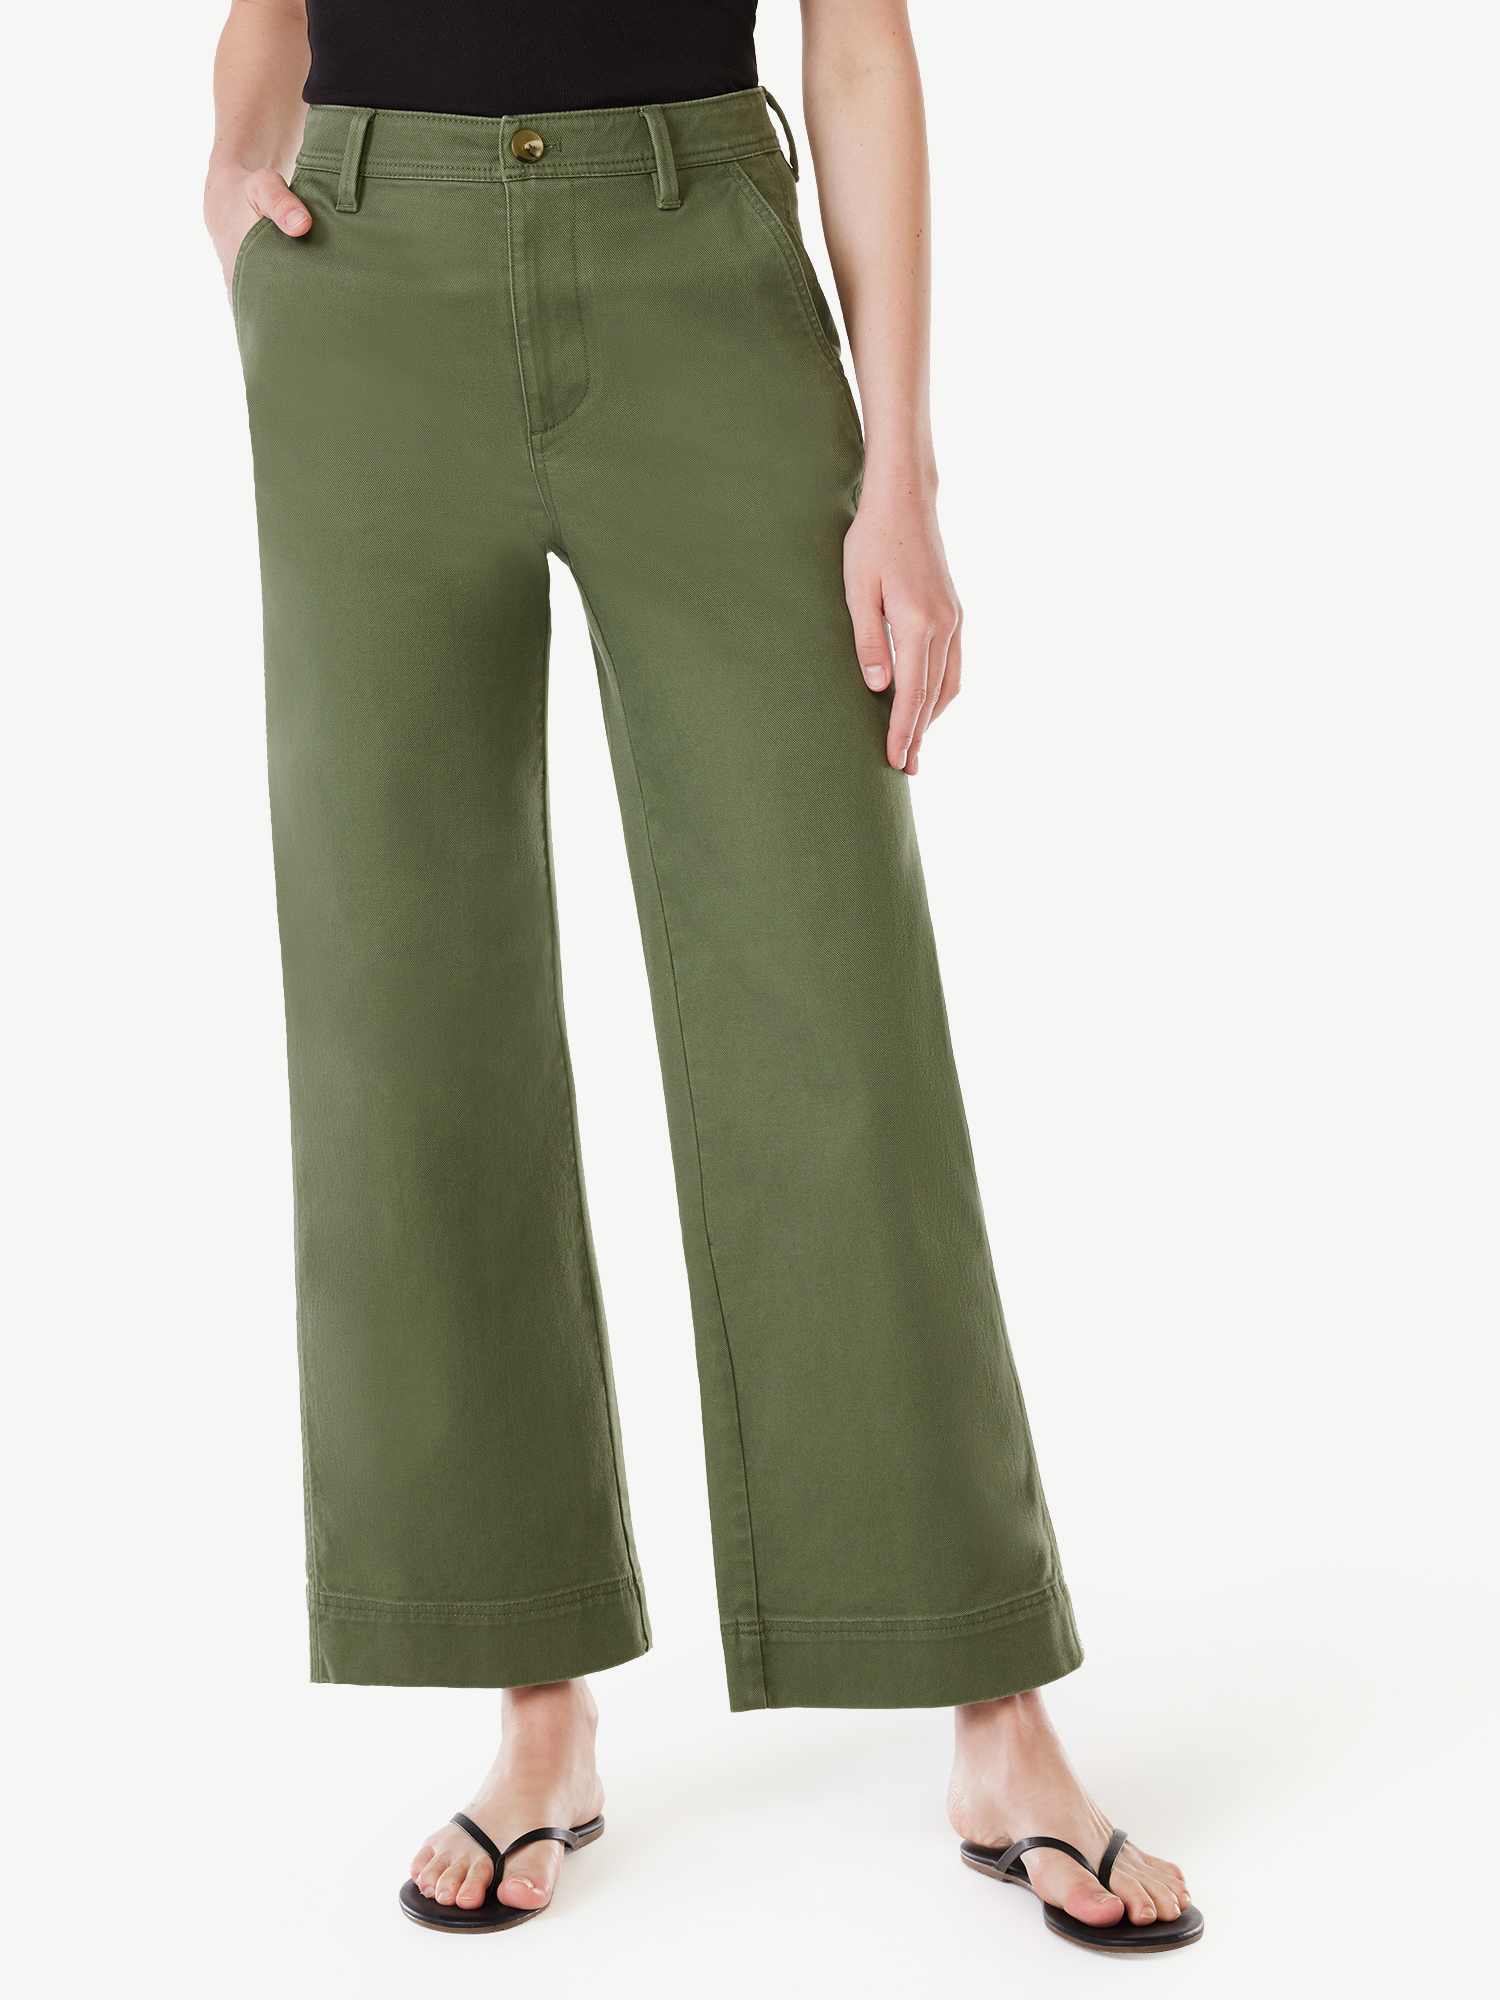 Free Assembly Women's Utility Wide Leg Straight Pants - image 1 of 6